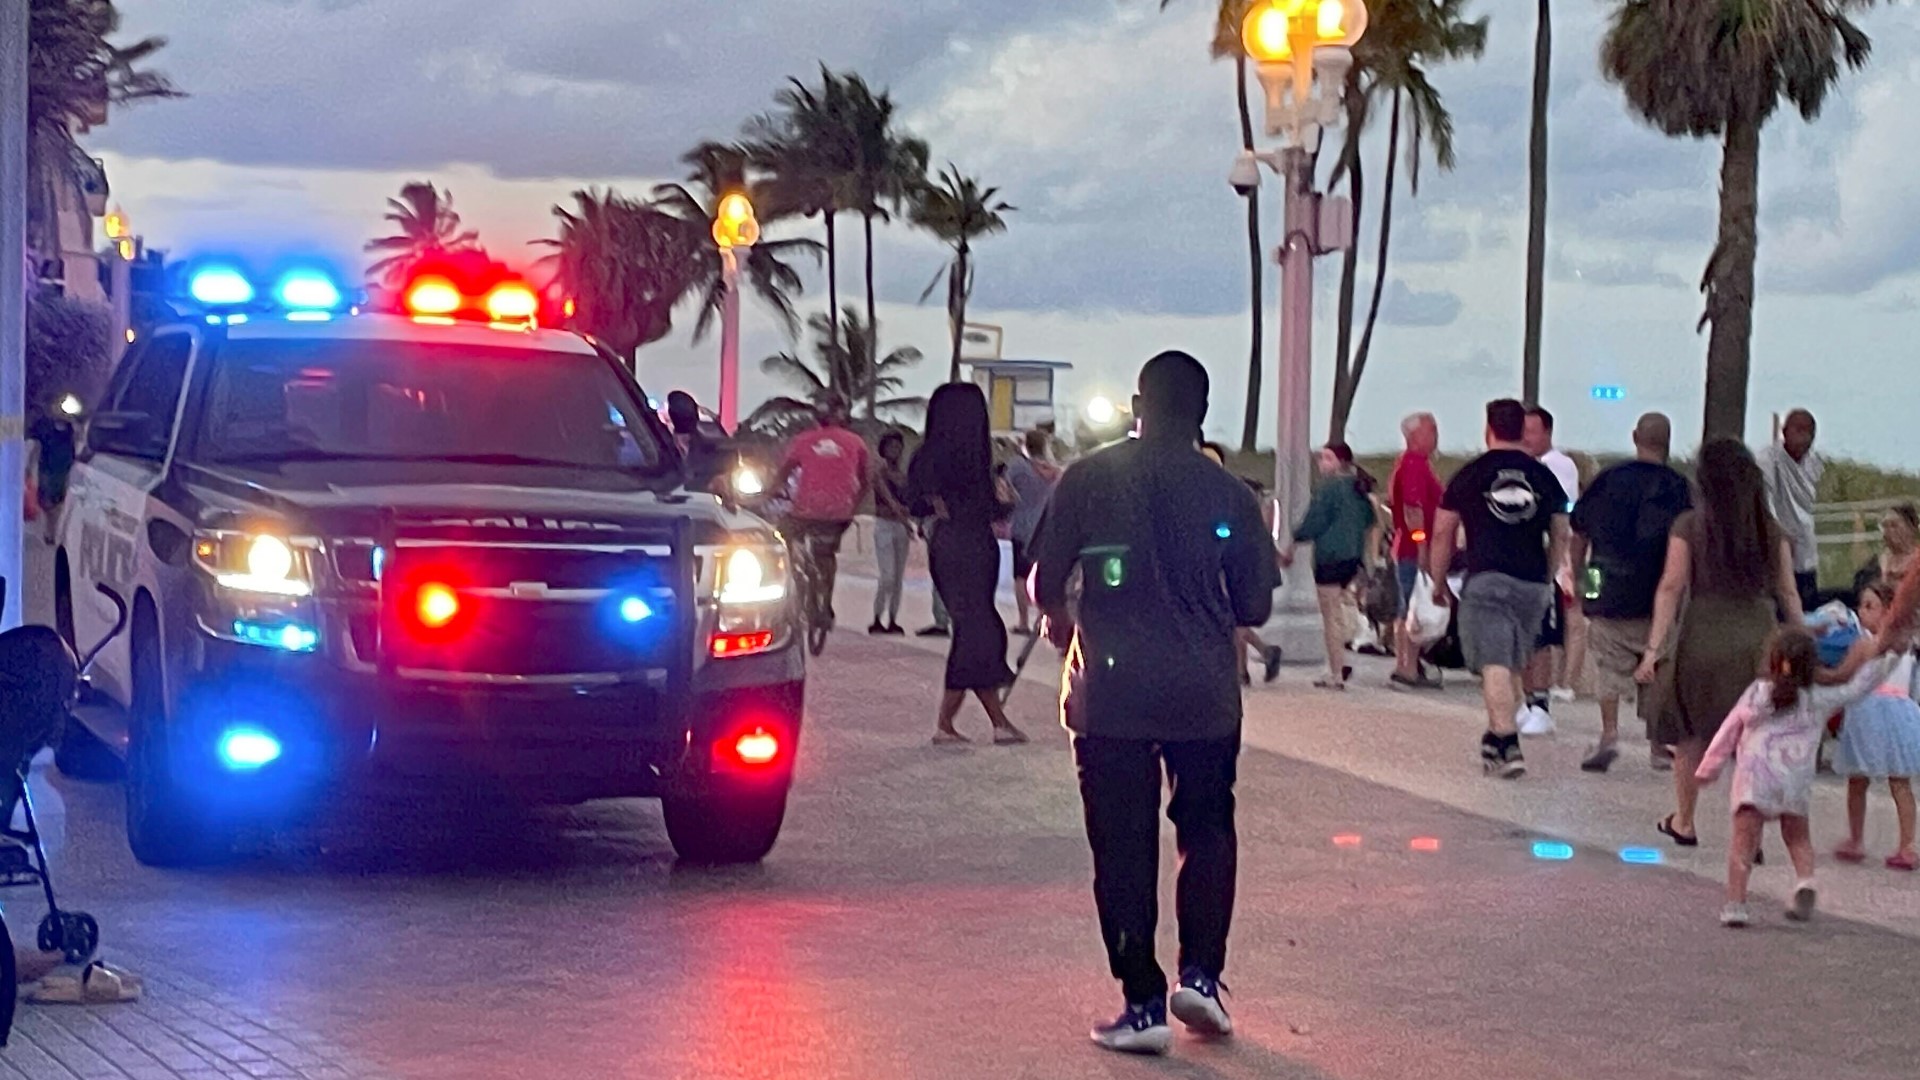 Officials and witnesses describe the shooting at a Florida boardwalk that left 9 people injured, including children.